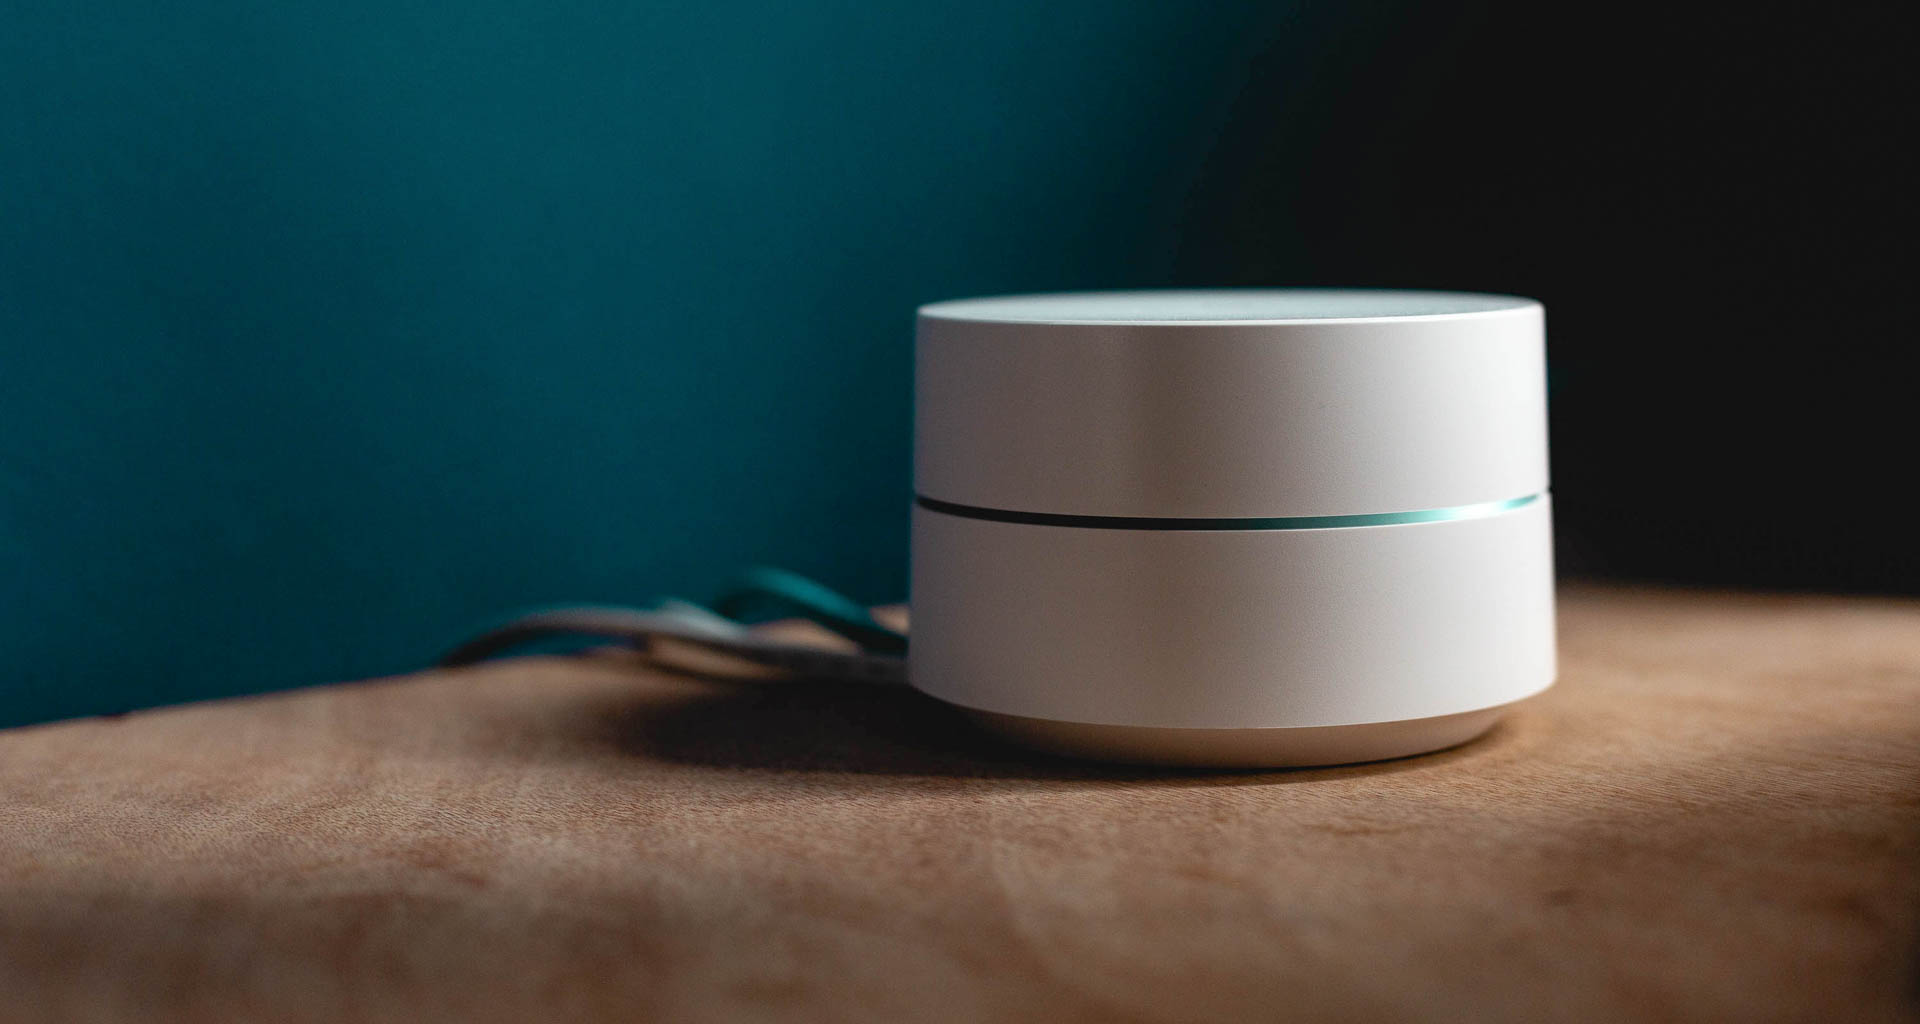 The cumulative effect of multiple smart home devices communicating at once can saturate your internet connection and slow things down. By determining your baseline bandwidth need then adding more for smart devices will keep things flowing. Image: Andres Urena on Unsplash.